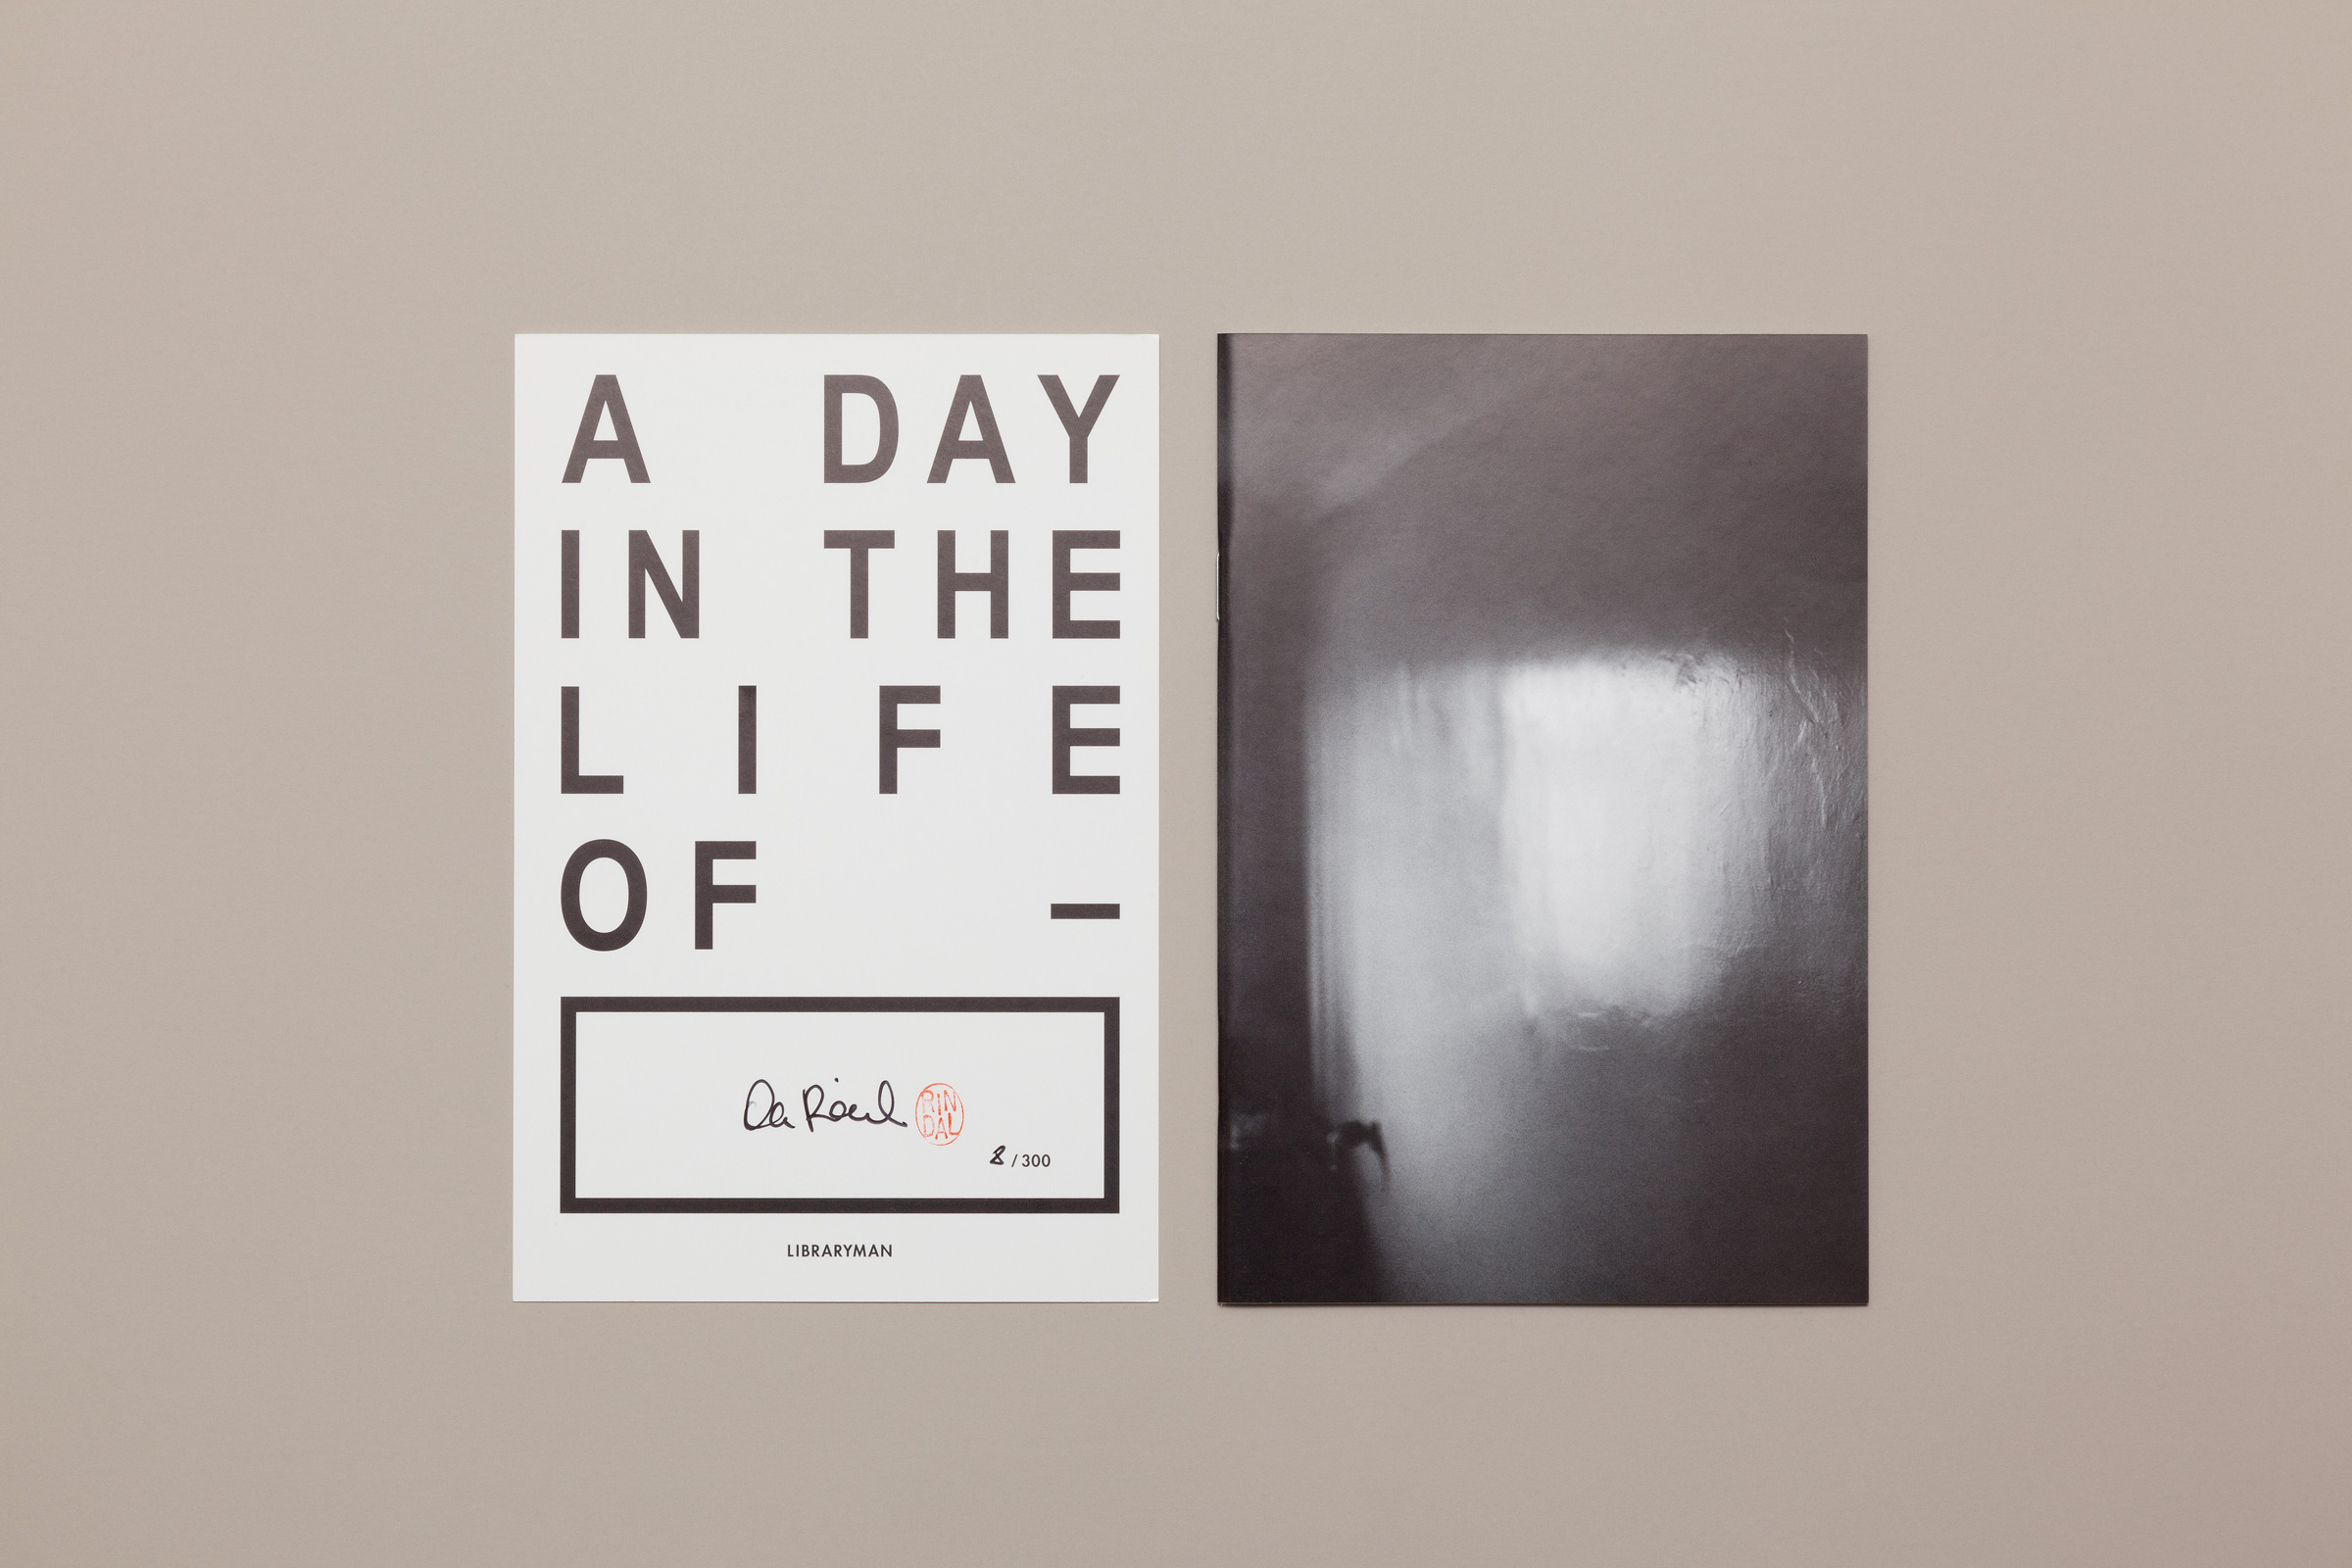 A Day in the Life of... Ola Rindal